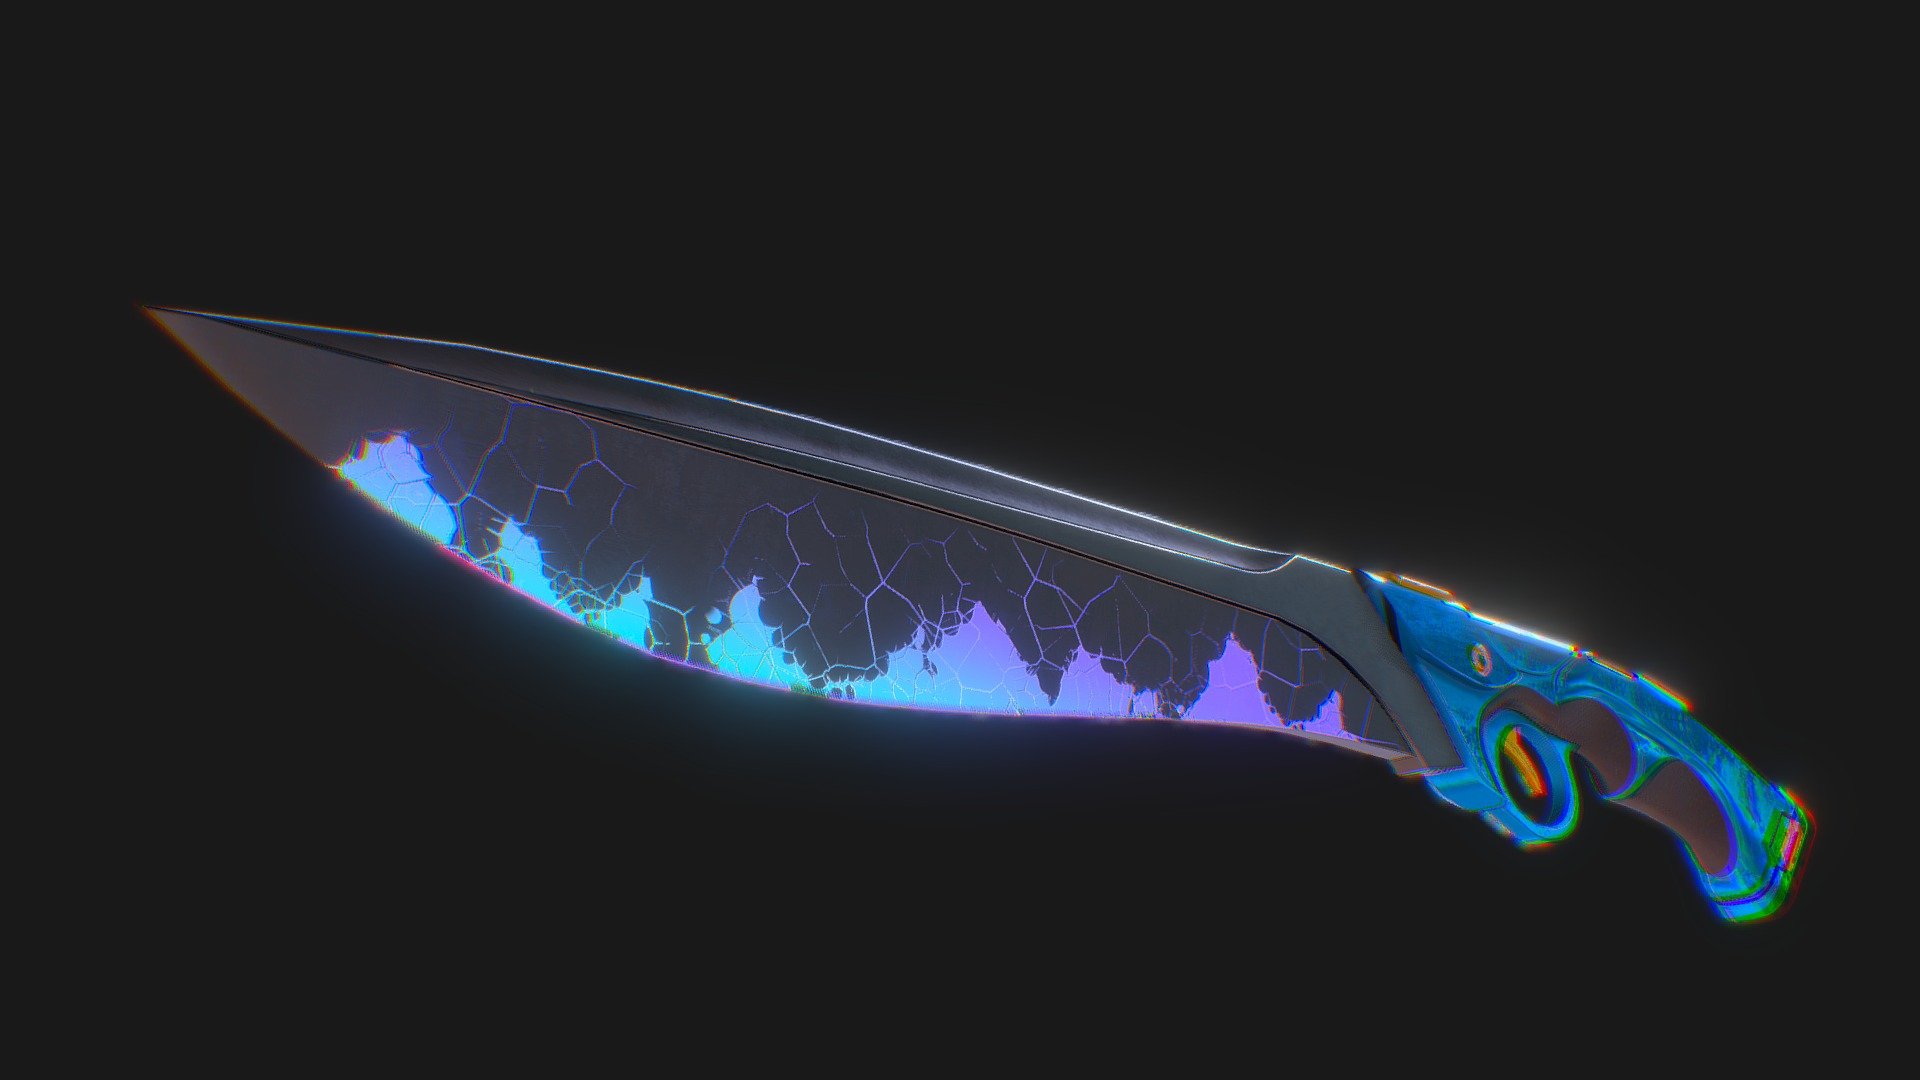 Model of an energy blade i made in my free time.

7.8k triangles + 2k textures with AO map, chamfered with normal map. Completely free to download.

Made with Blender + Substance Painter 3d model